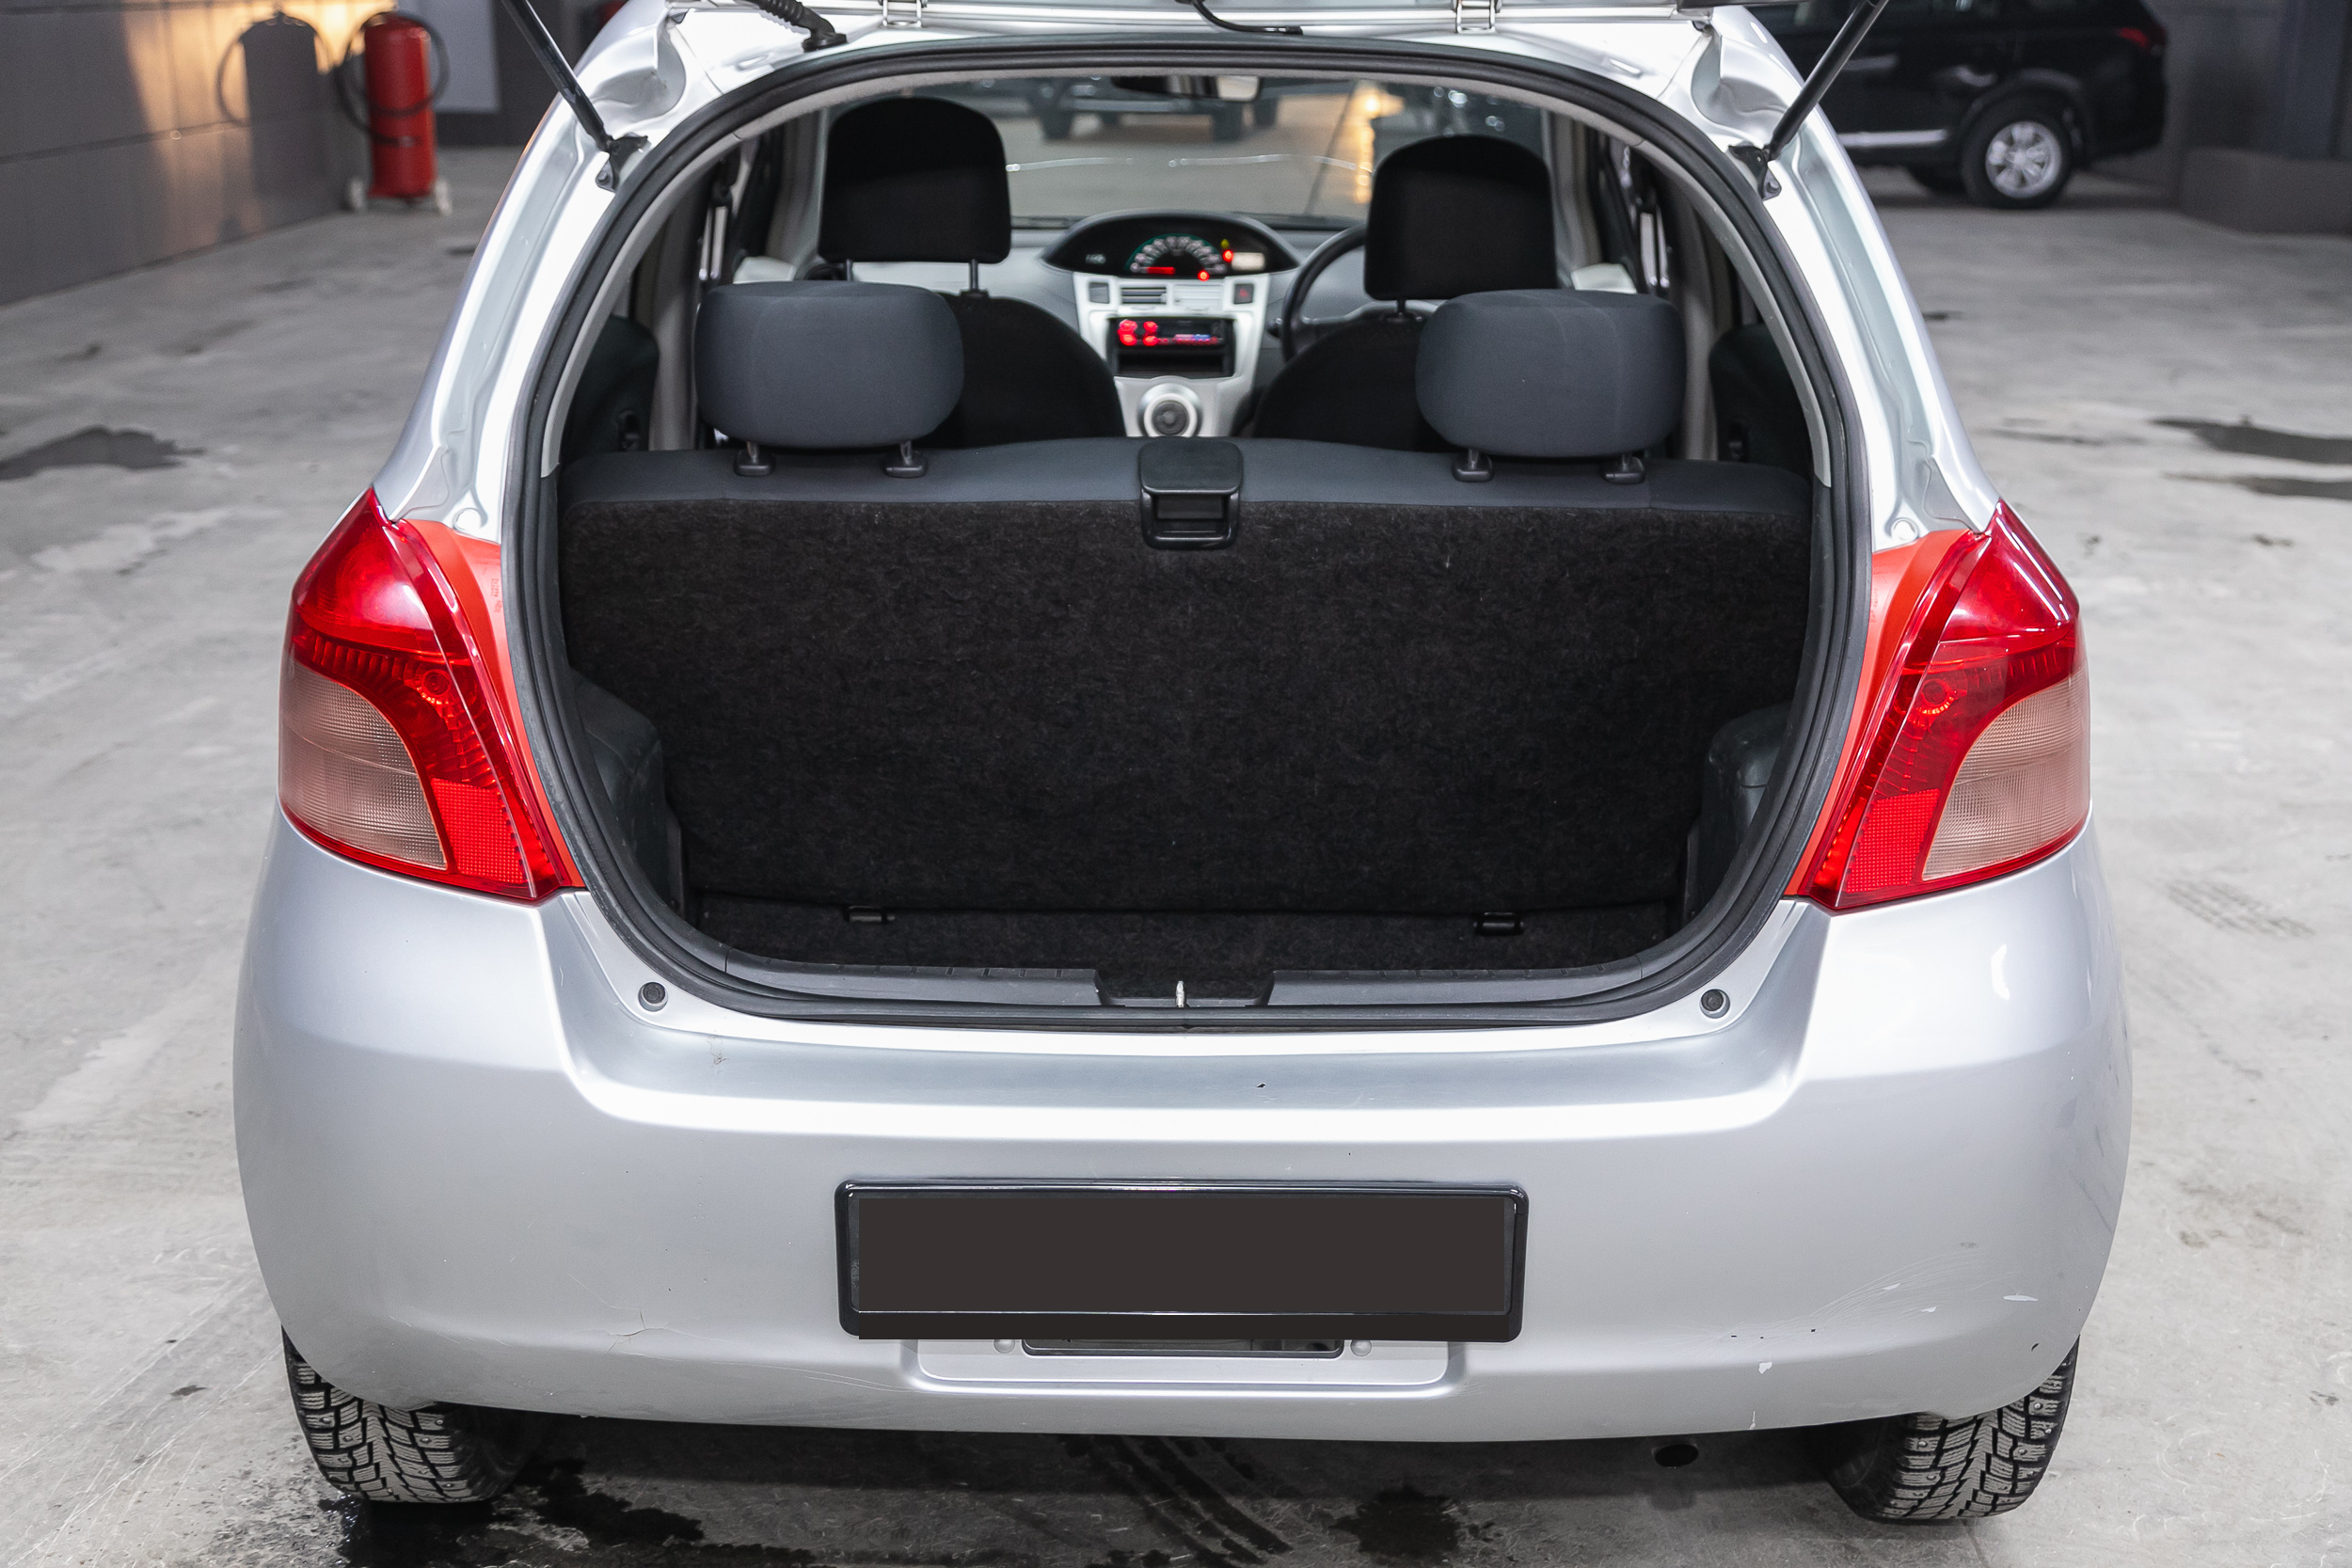 Toyota Vitz rear view + boot space + open boot